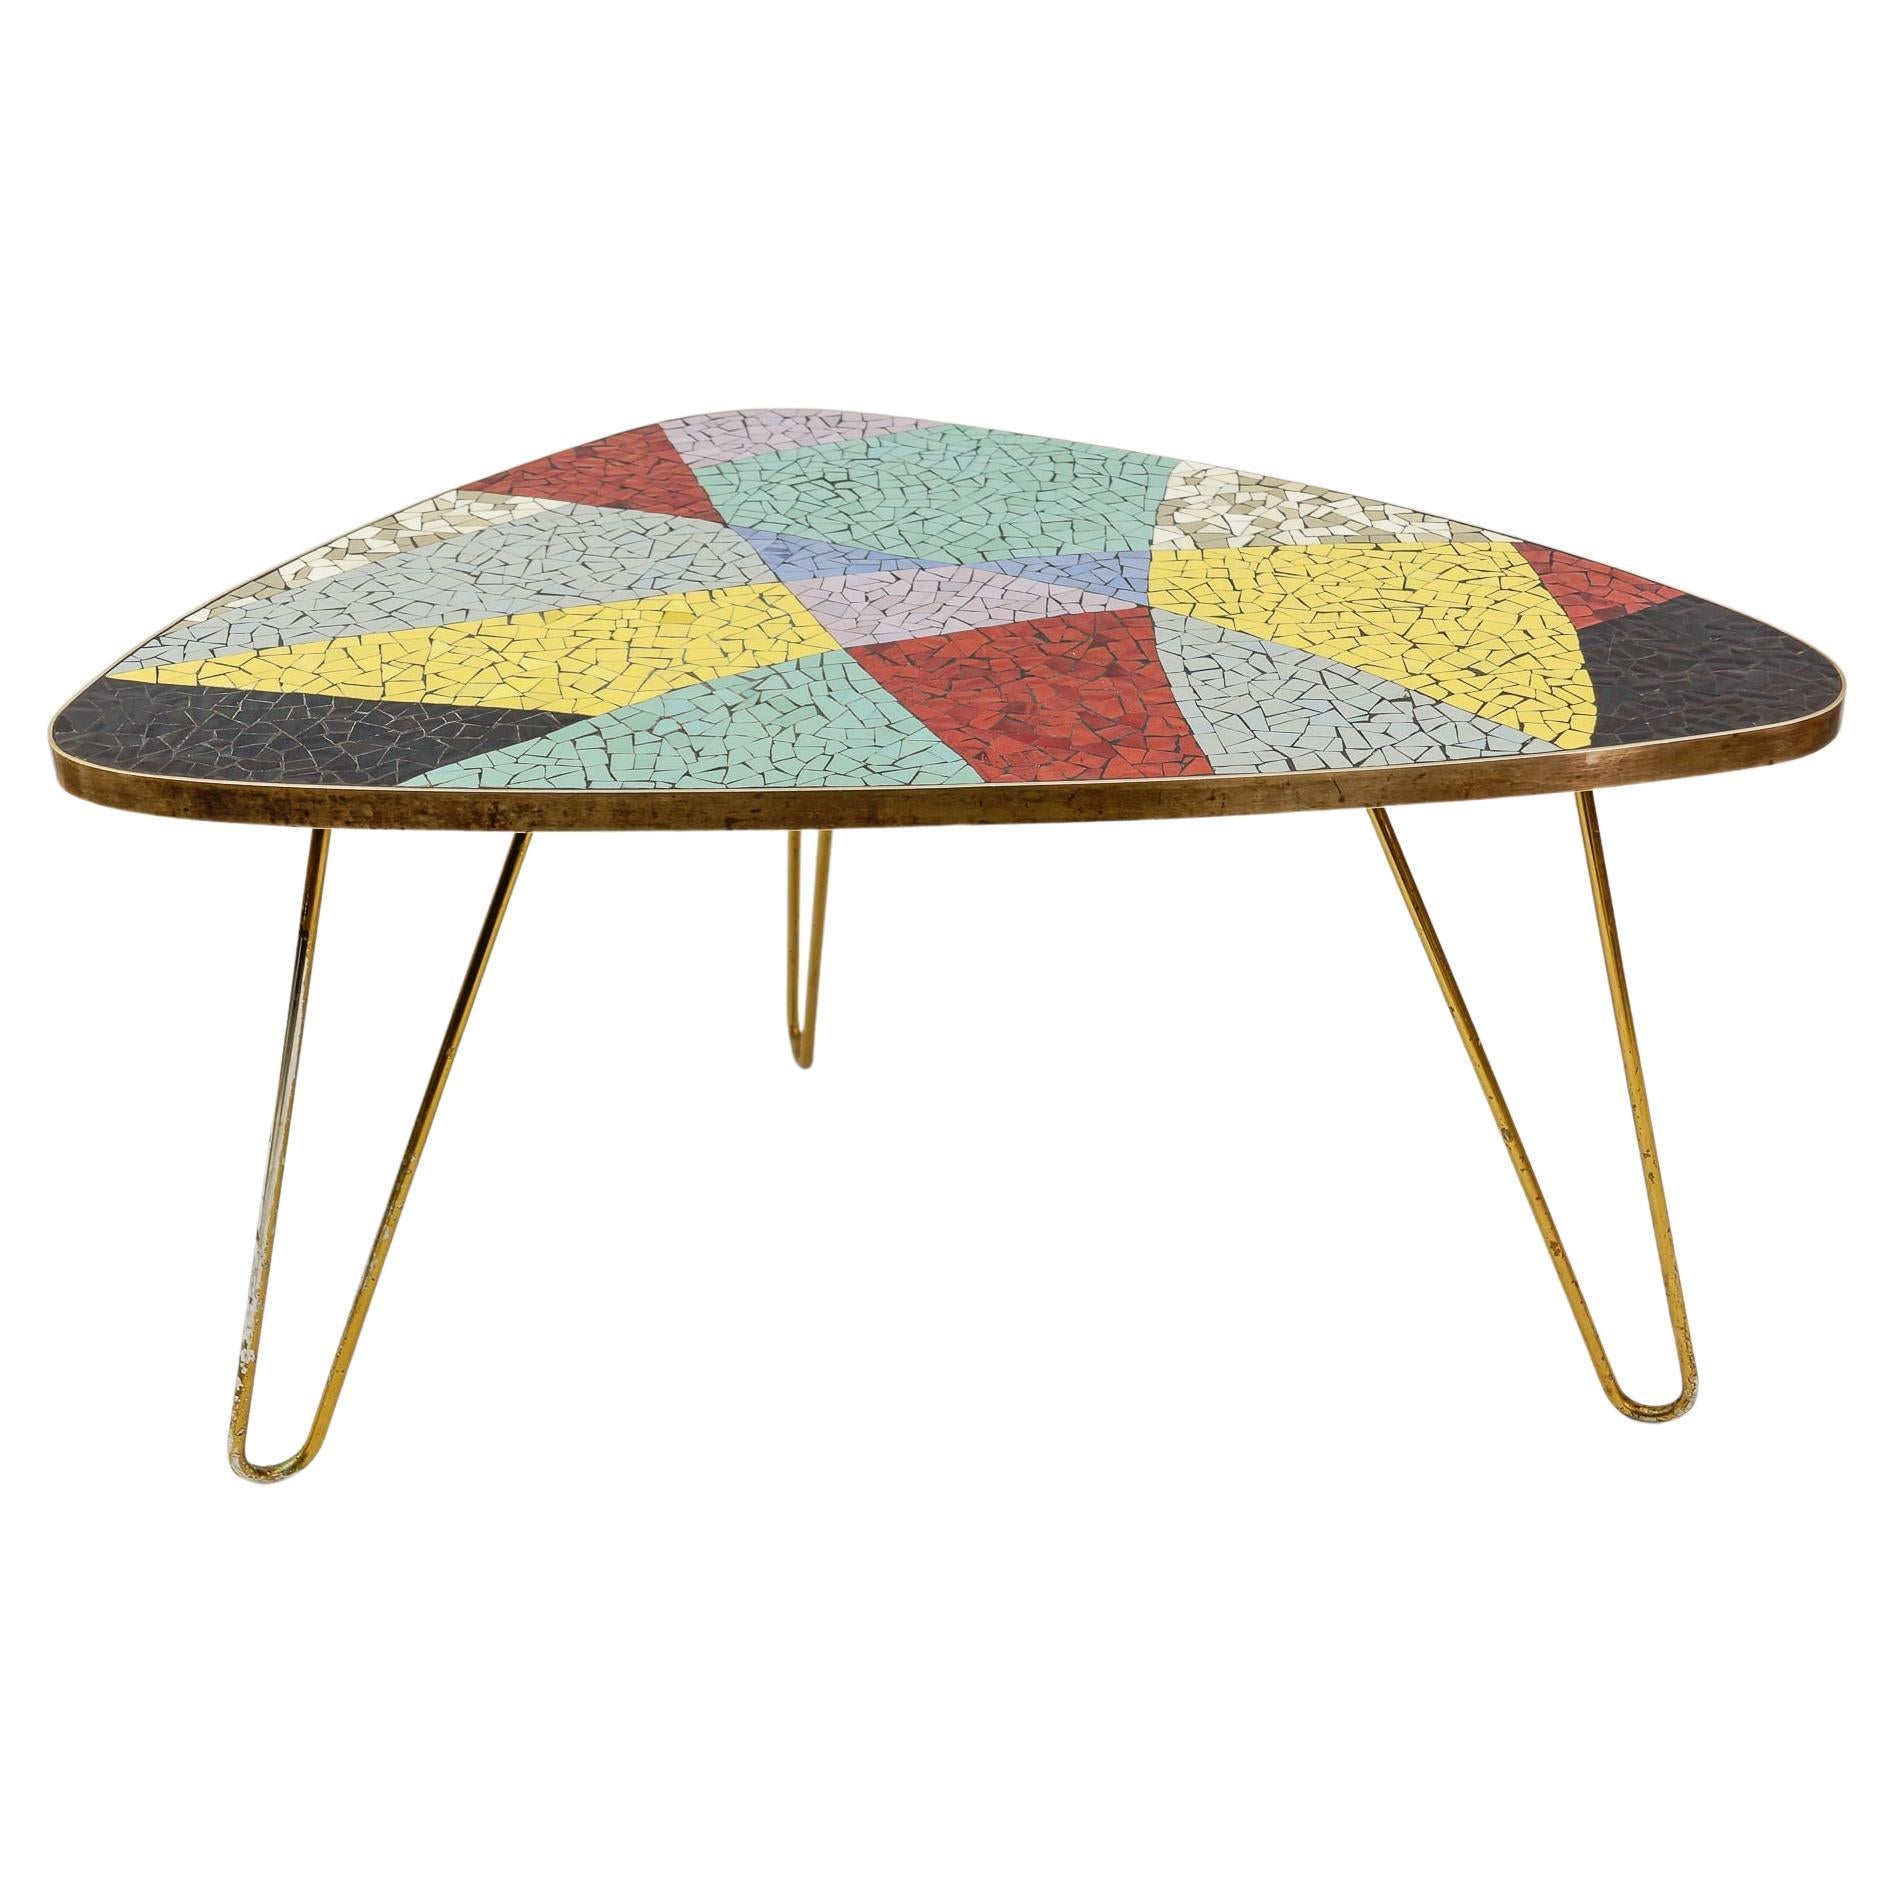 Colorful Mosaic and Brass Coffee Table, 1950s Italy For Sale